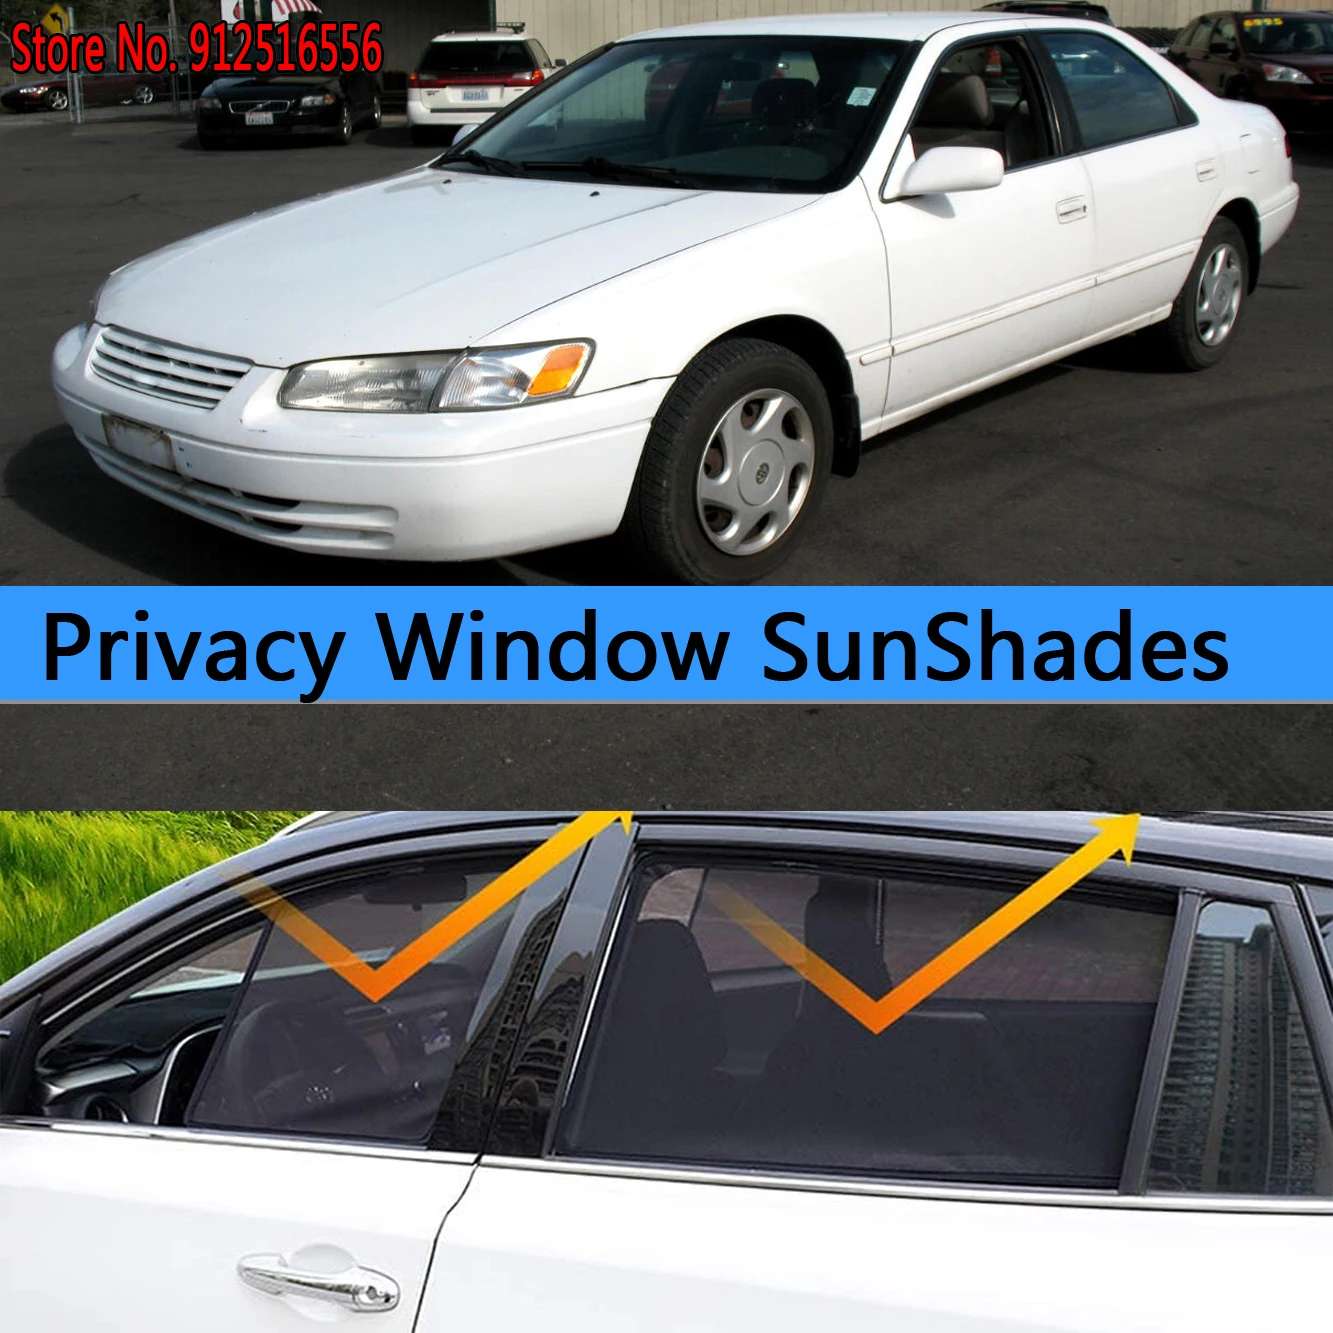 

Side Sun Shade Shading Curtain Protection Window SunShades Sunshield Accseeories for Toyota Camry 20 Xv20 1997 1999 2000 2001